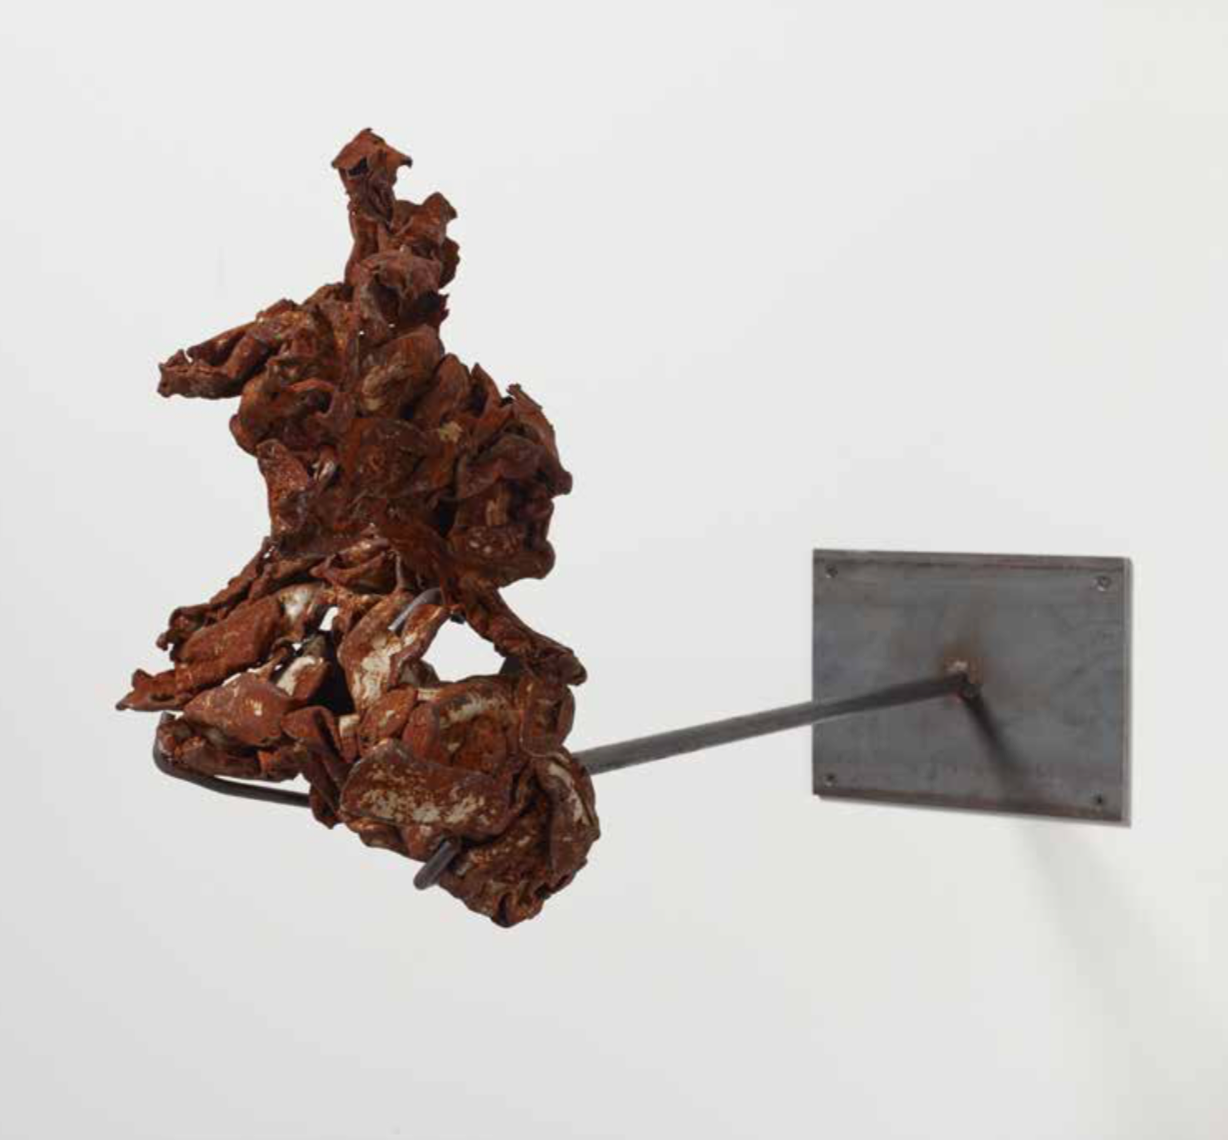 Lot #2
Carol Bove
Tat, 2013
Found metal and steel 25 x 12 × 9 1⁄2 inches